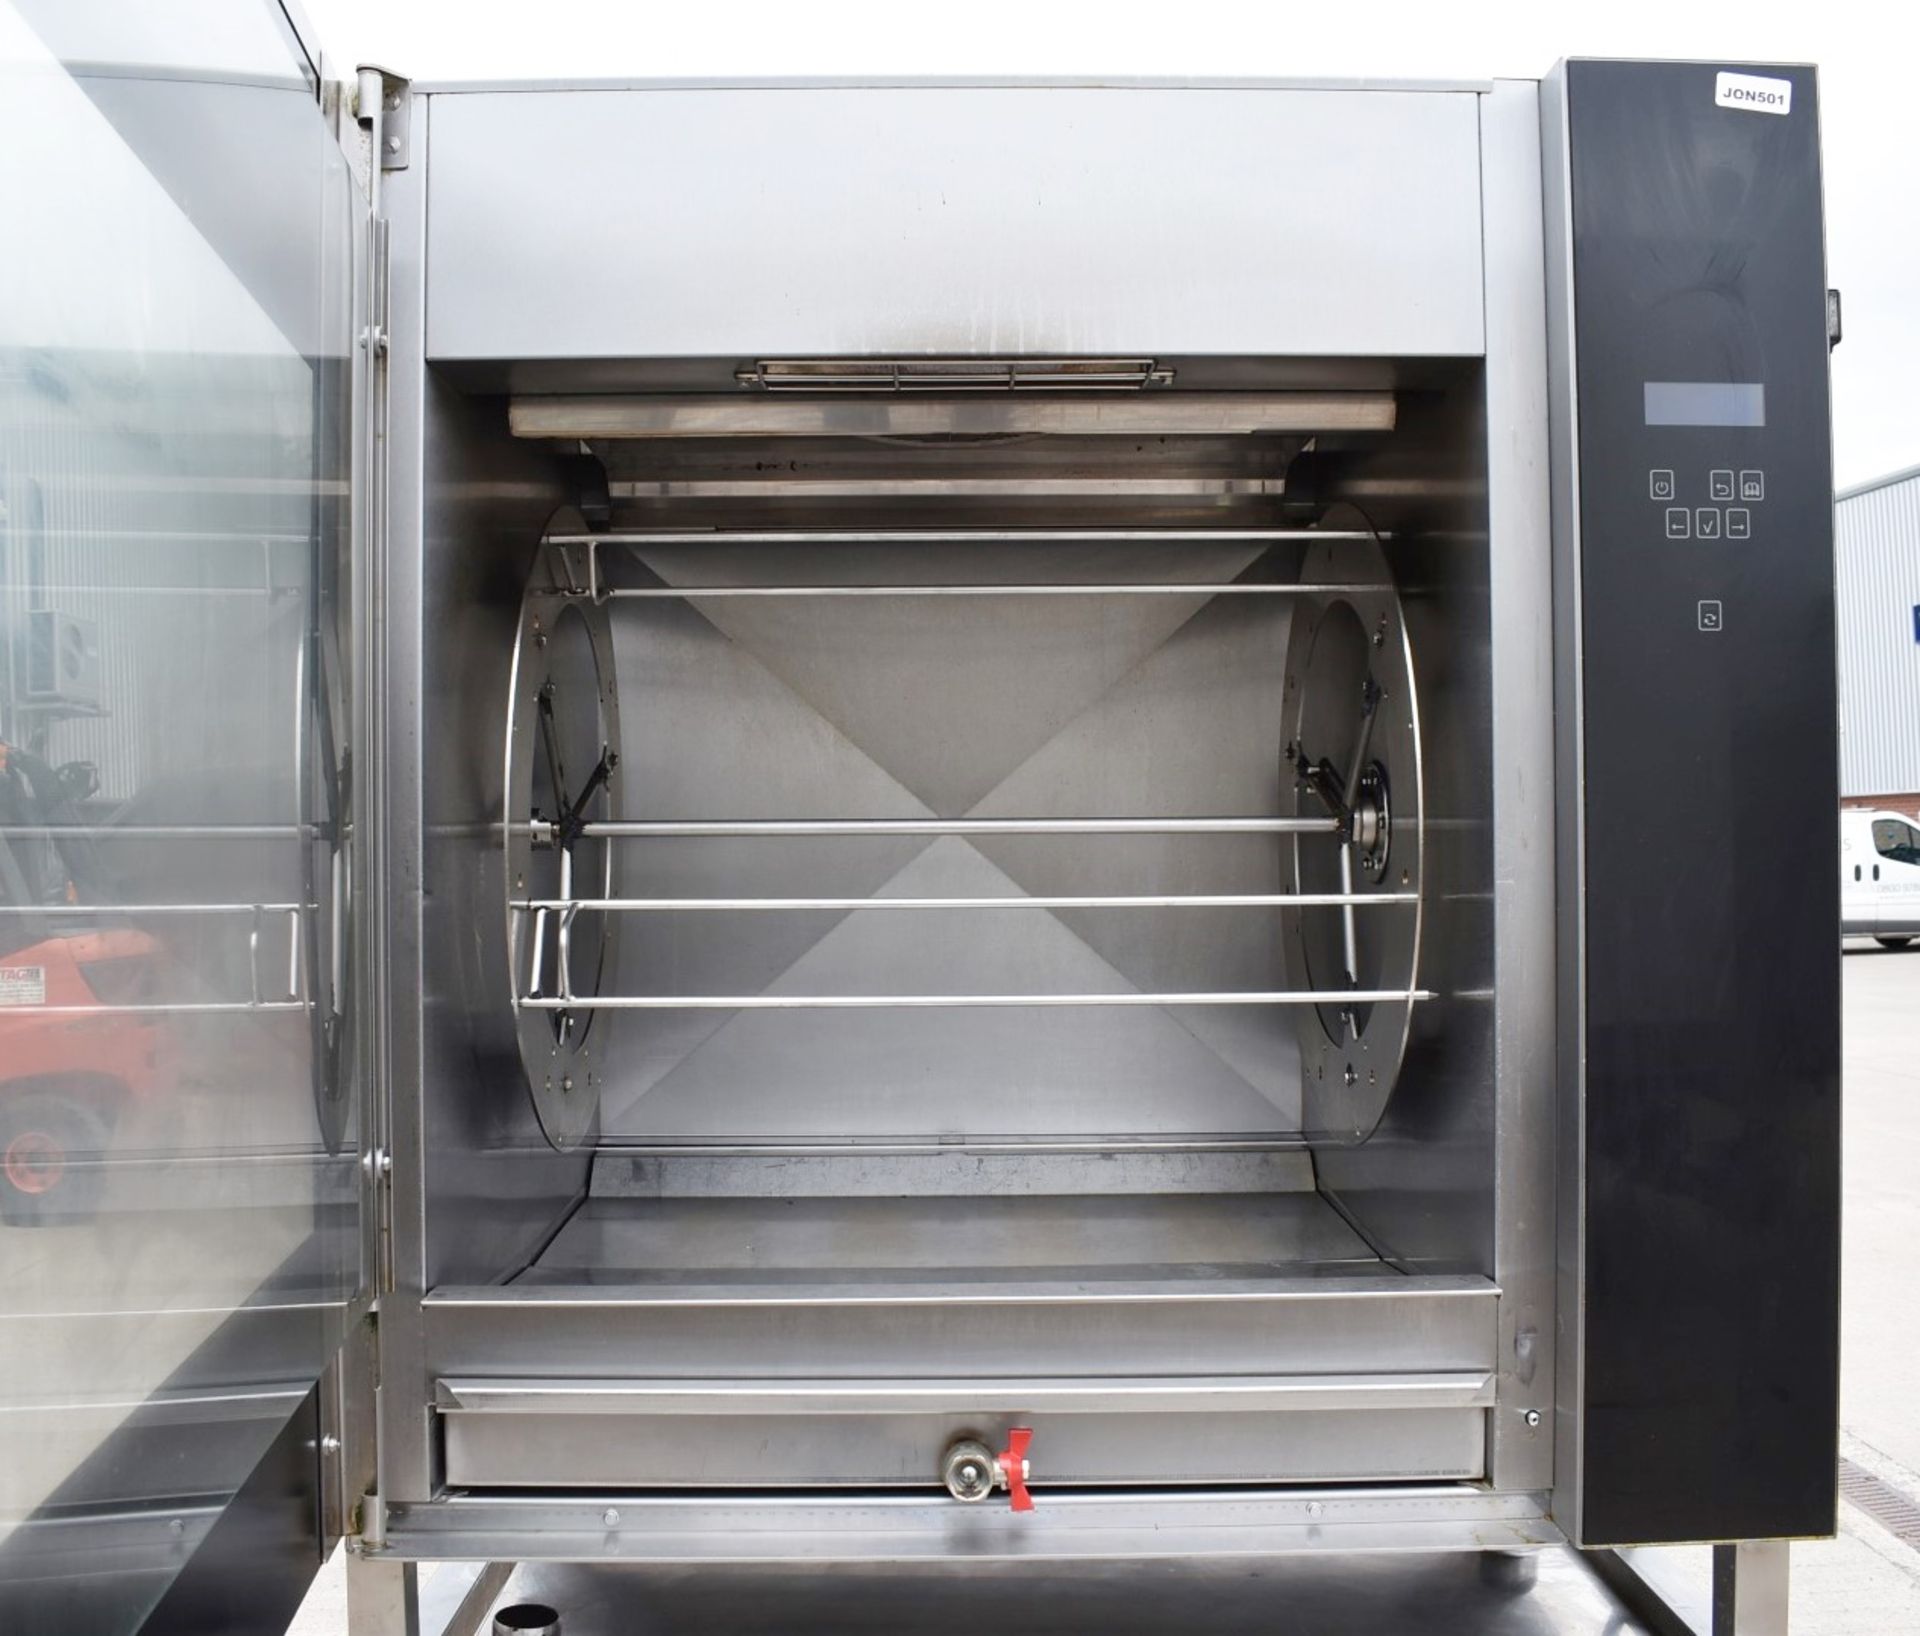 1 x Houno Electric Combi Oven and Fri-jado Rotisserie Oven Combo With Stand - 3 Phase - Image 10 of 22